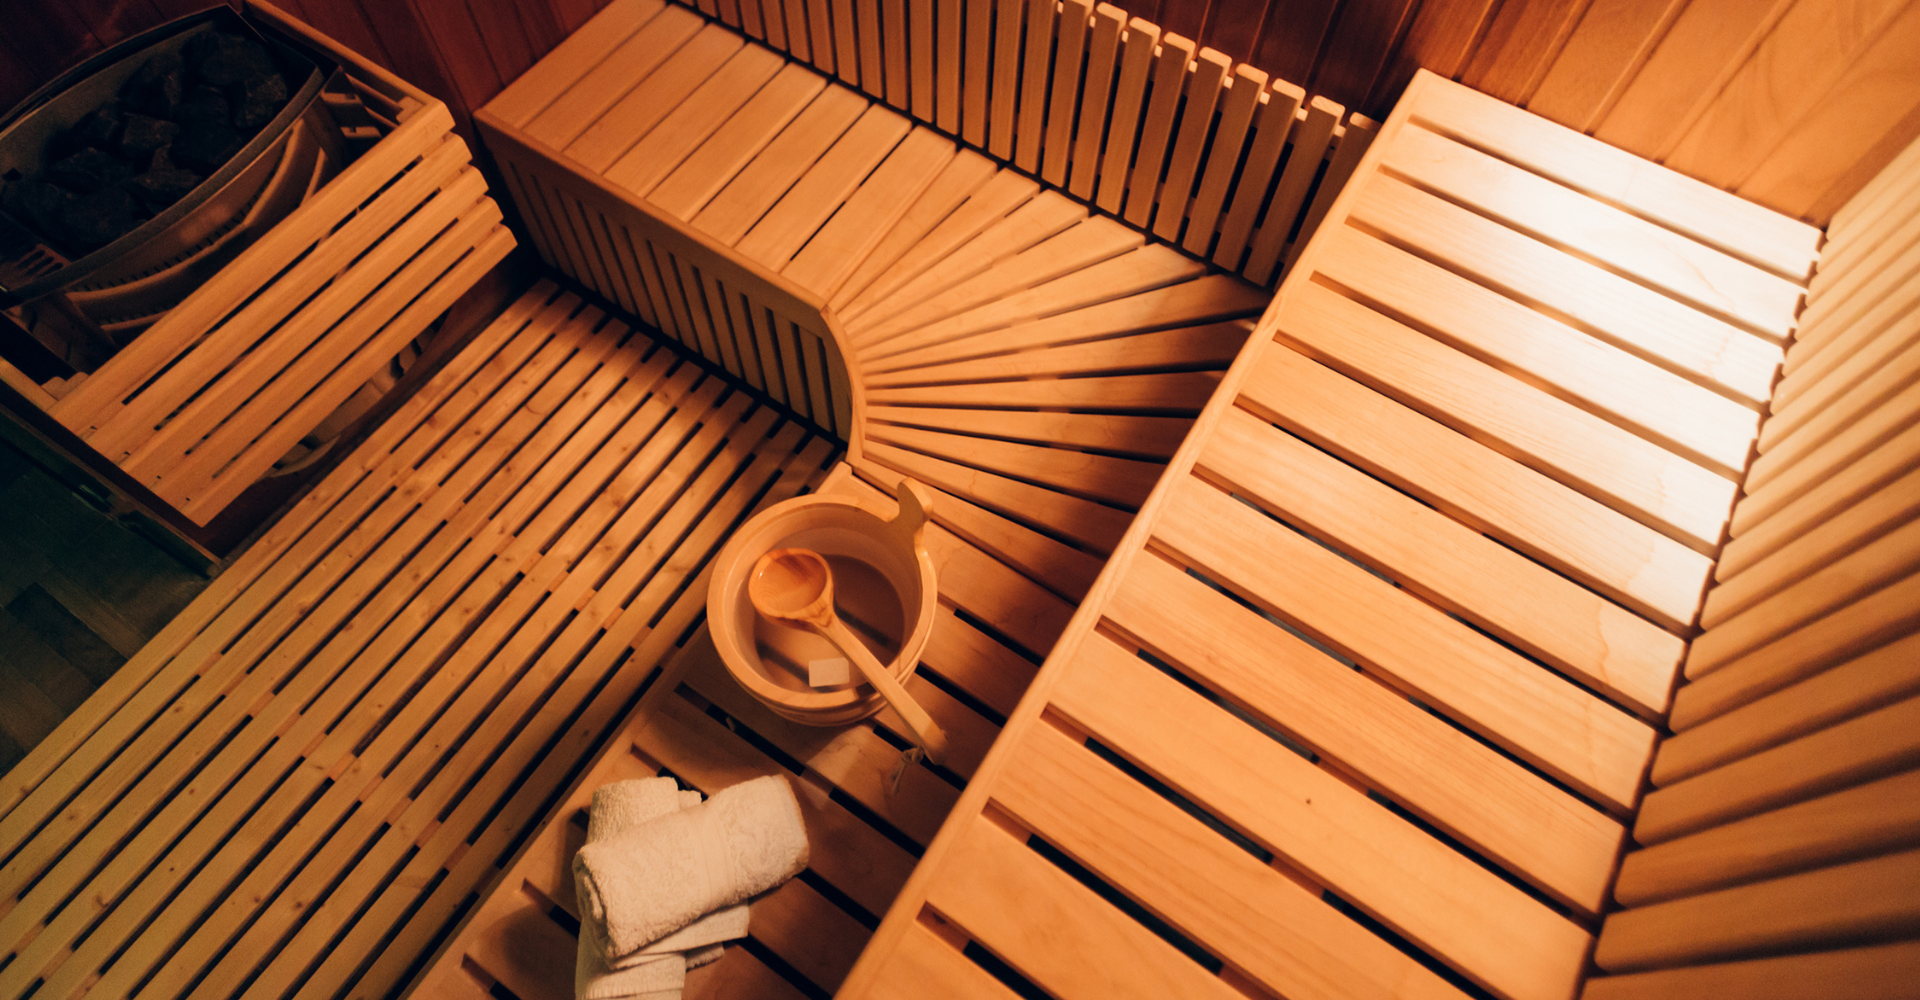 Remarkable Health Benefits of Dry Sauna Bathing for Your Overall Well-being